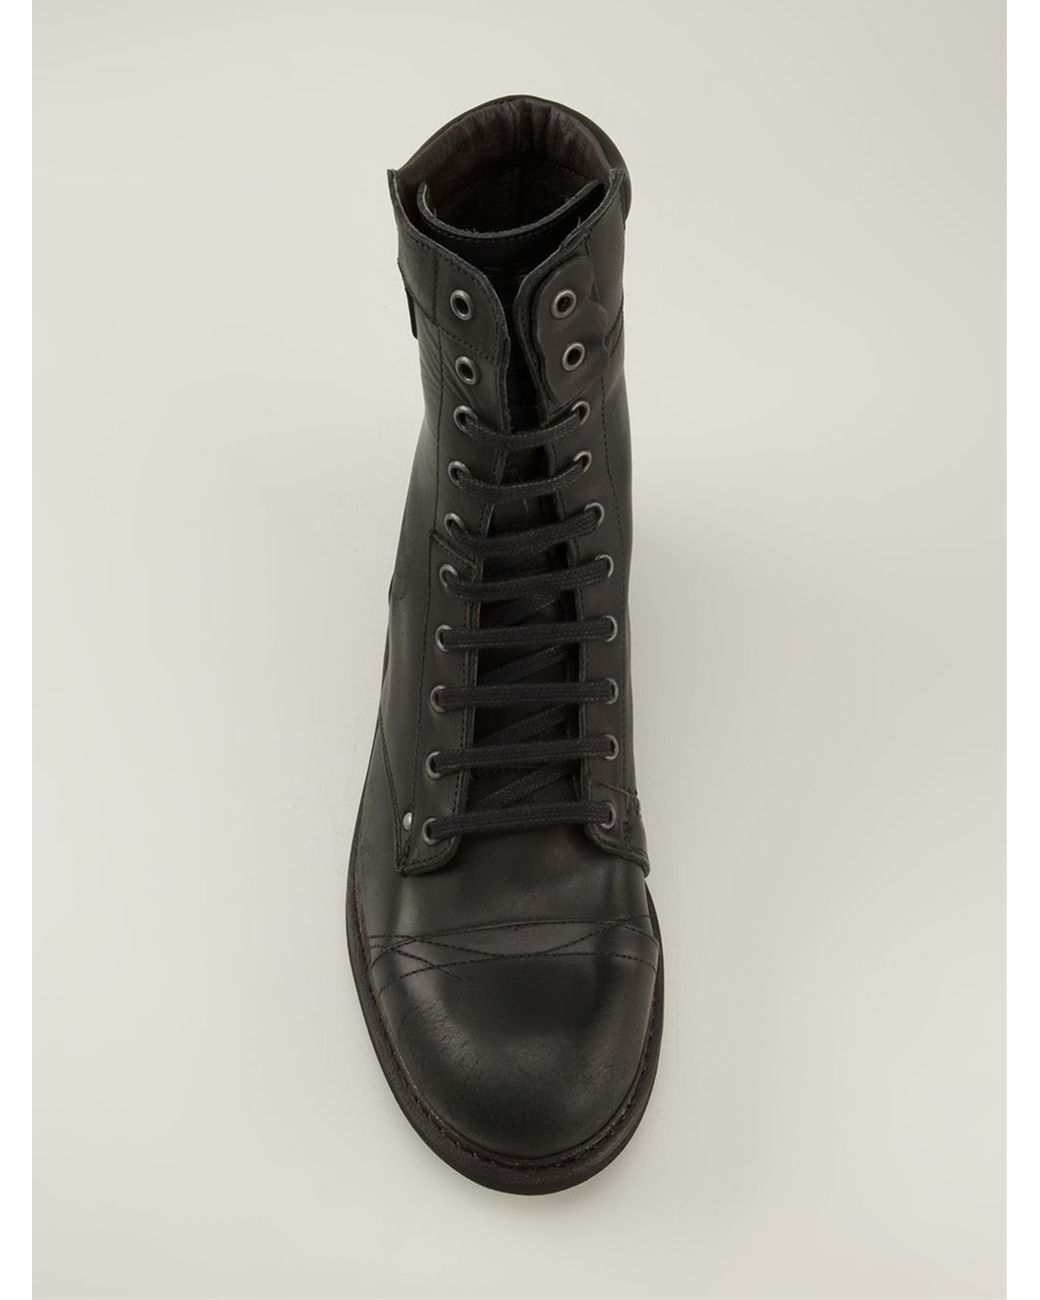 DIESEL 'Cassidy' Boots in Black for Men | Lyst